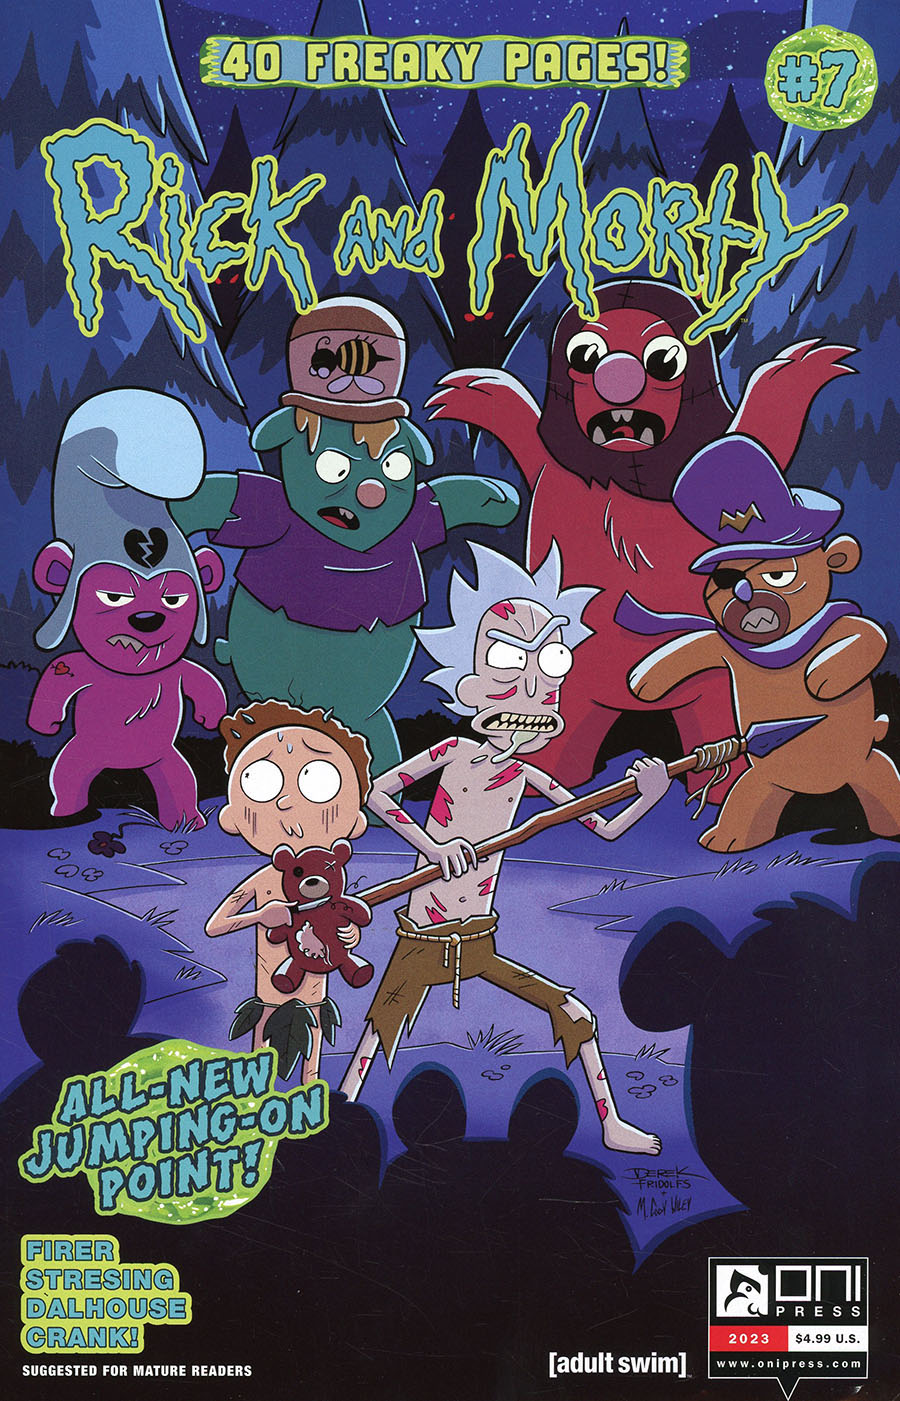 Rick And Morty Vol 2 #7 Cover C Variant Derek Fridolfs & M Cody Wiley Cover